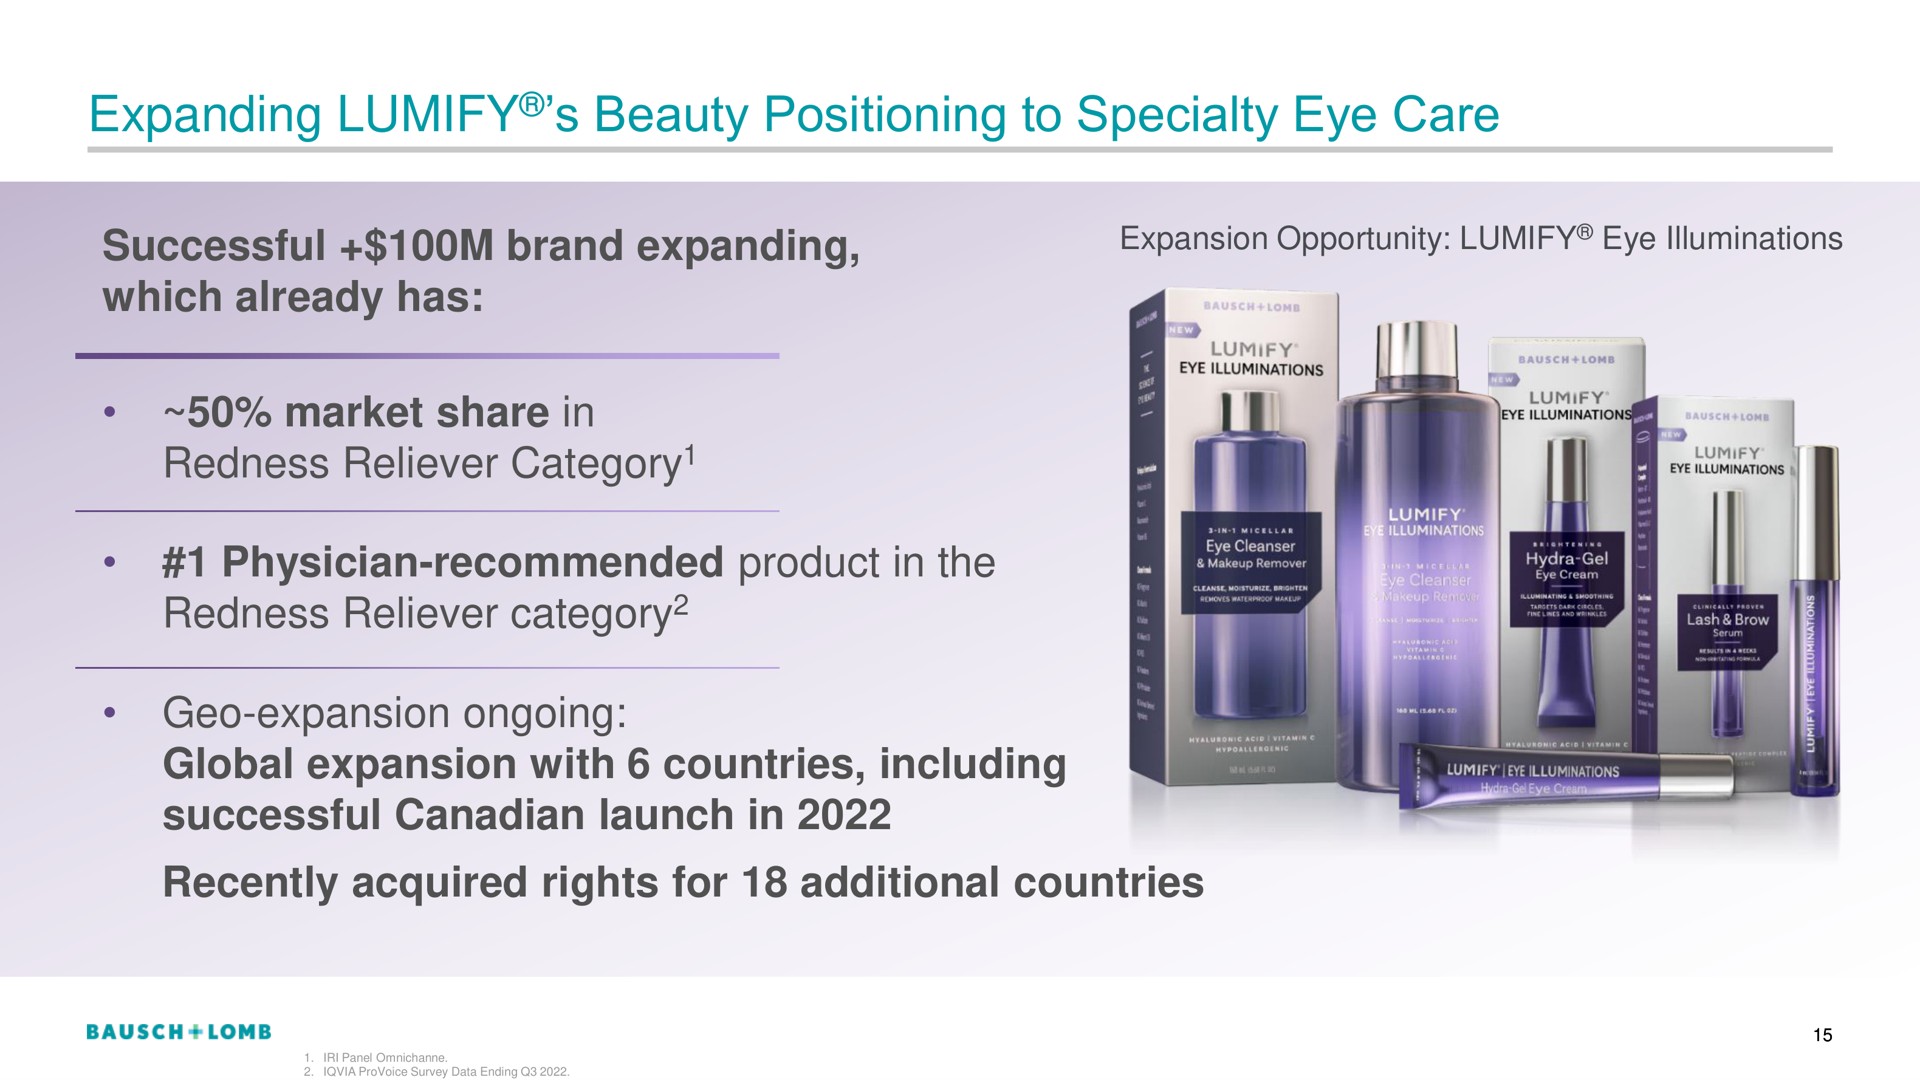 expanding beauty positioning to specialty eye care redness reliever category redness reliever category i global expansion with countries including | Bausch+Lomb